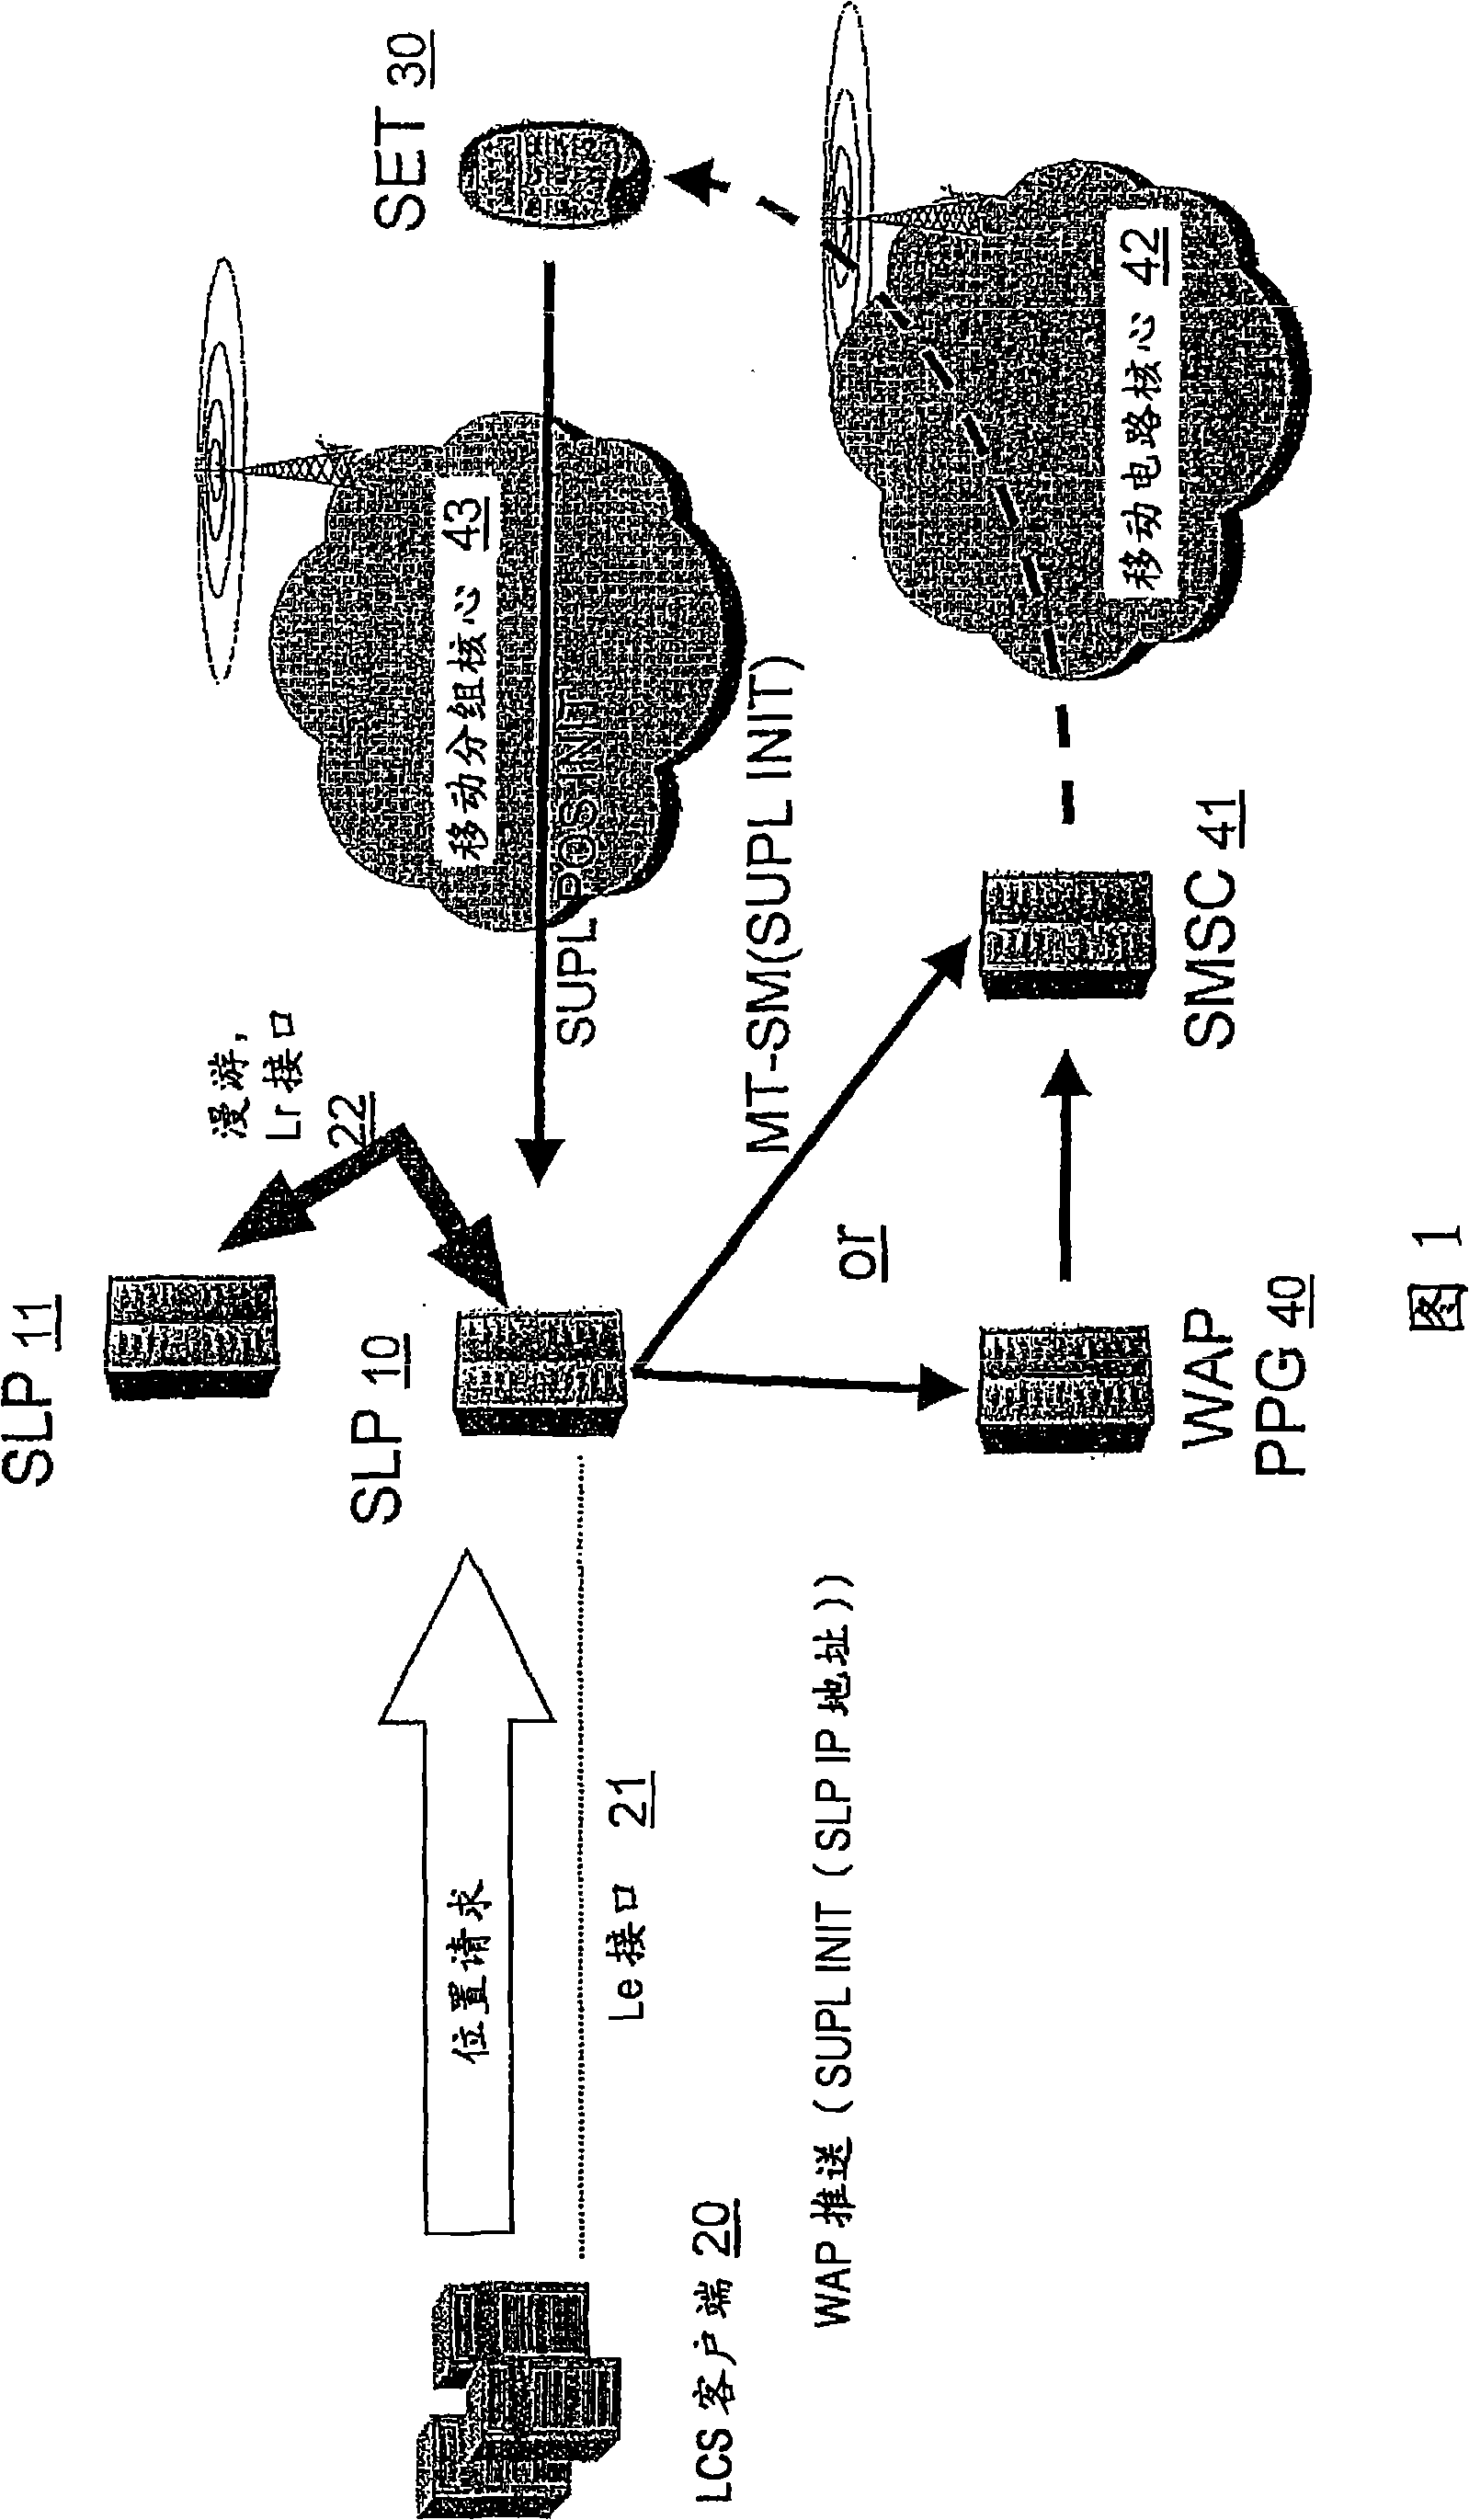 Terminal status discovery in secure user plane location positioning procedure